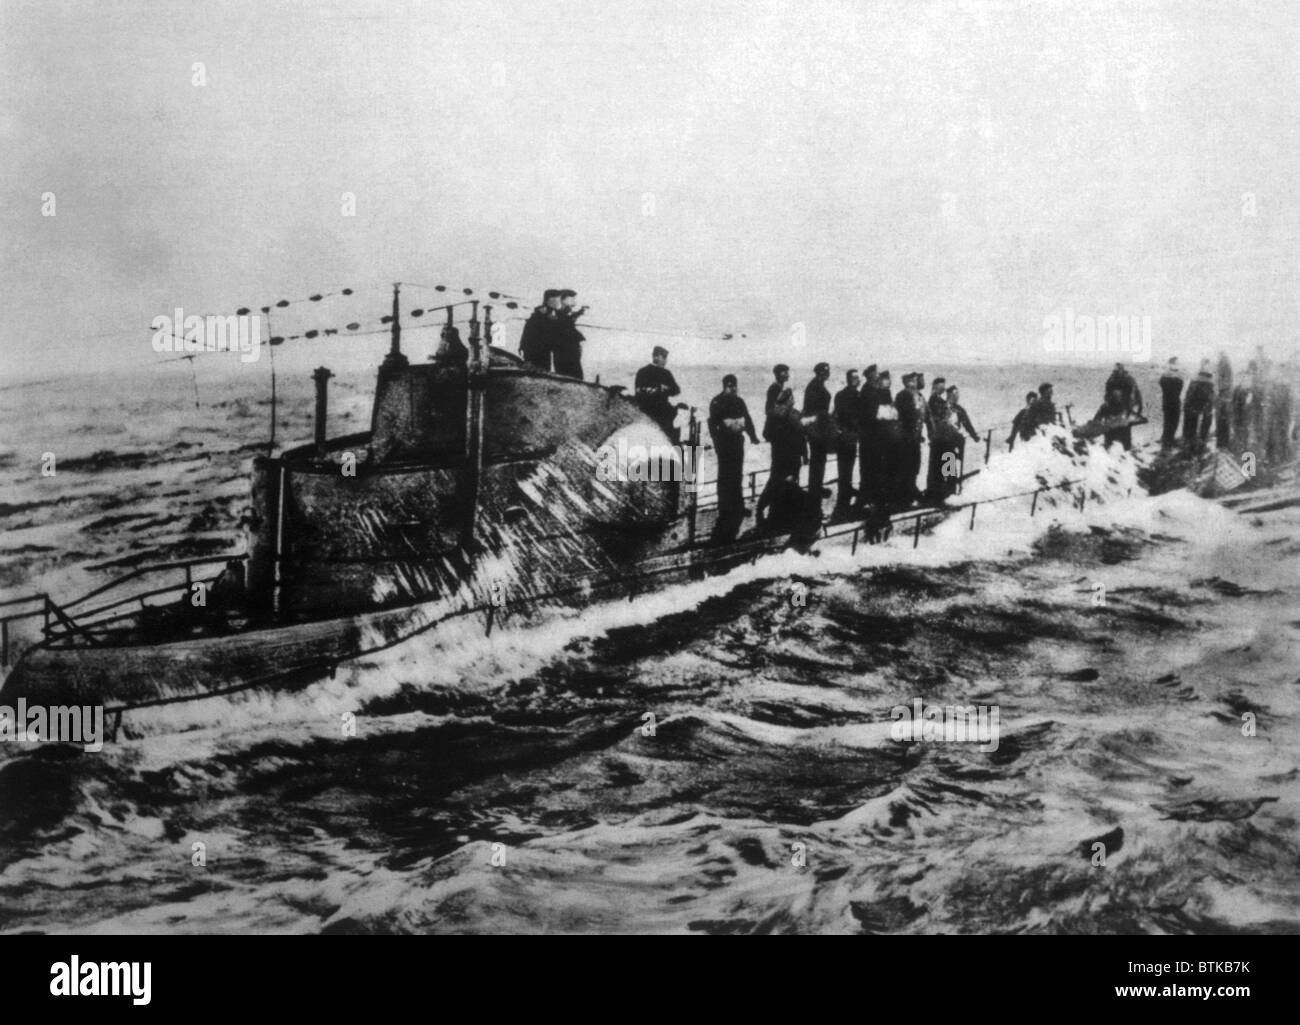 World War I, crew of the German U-boat U-58 on deck as it is captured by the American Navy, U.S. Navy photo, 1918 Stock Photo